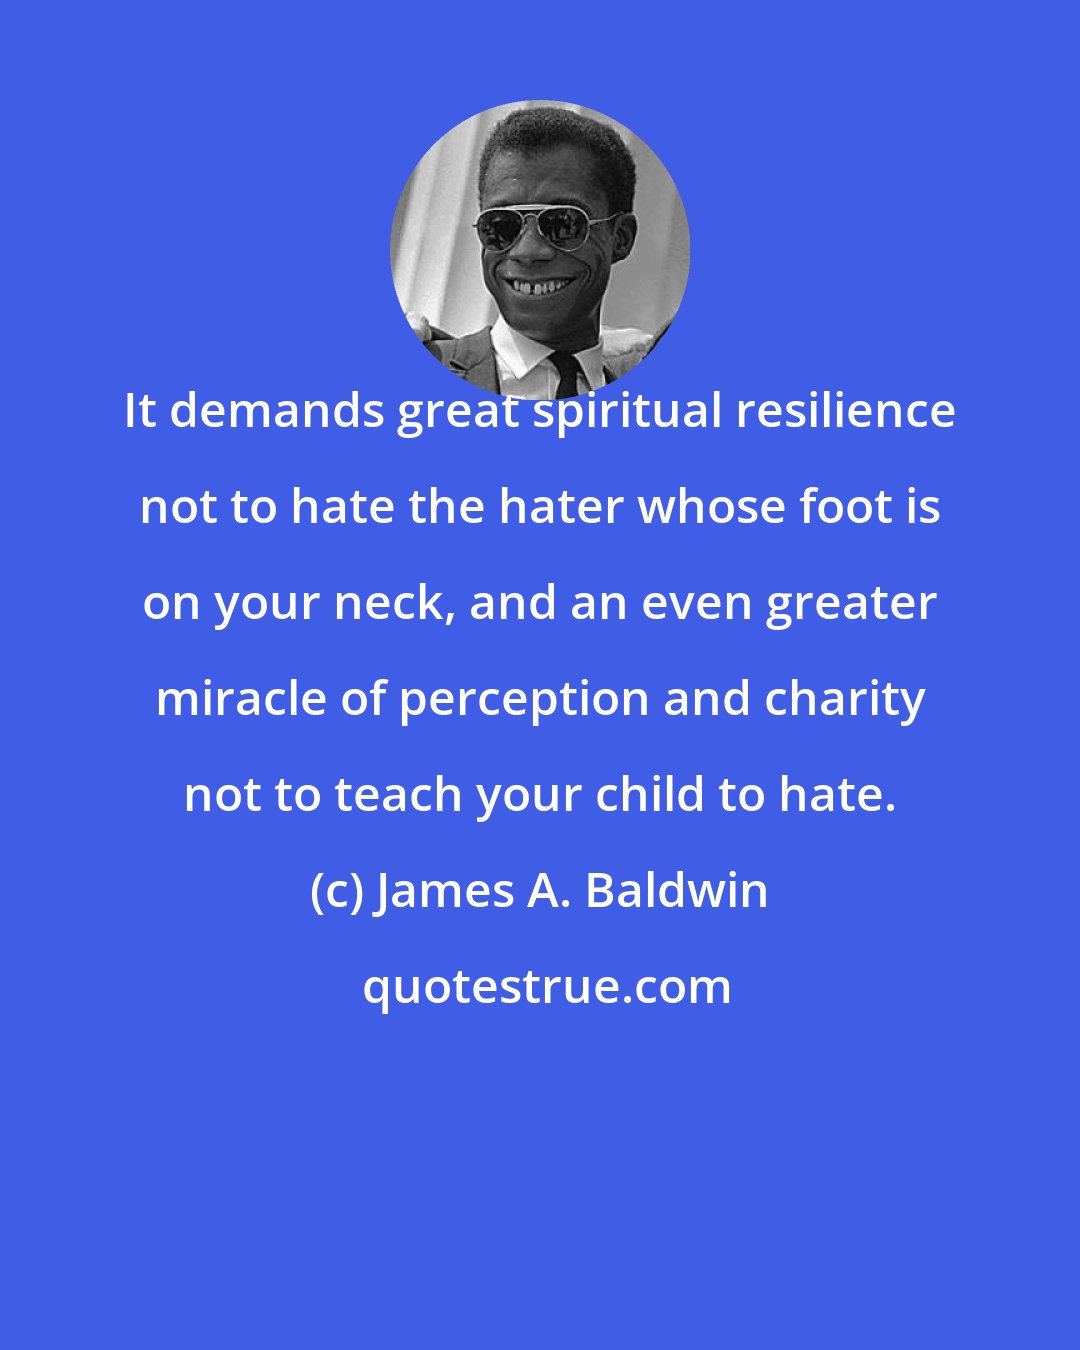 James A. Baldwin: It demands great spiritual resilience not to hate the hater whose foot is on your neck, and an even greater miracle of perception and charity not to teach your child to hate.